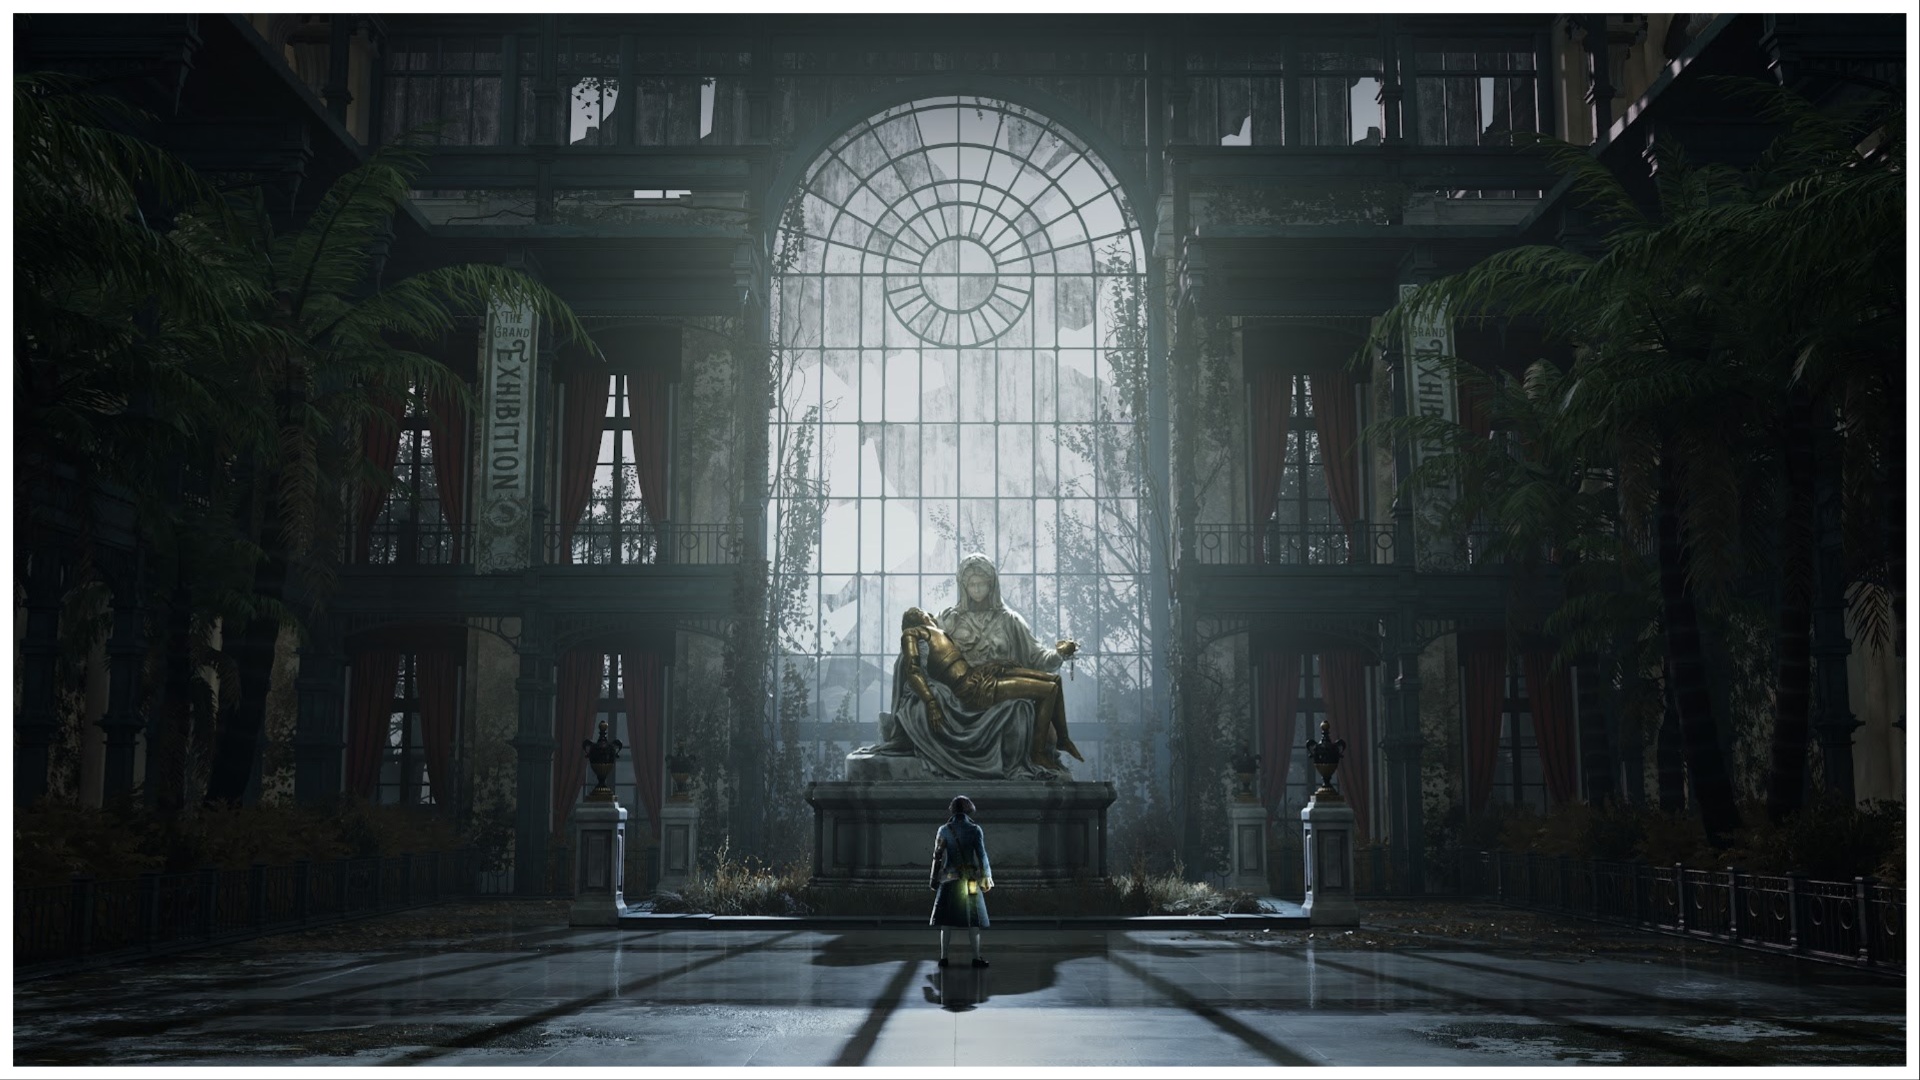 The image shows Pinocchio standing before a grand rounded window as soft light pools in. Before him is a worn statue of rock which holds the resting corpse of someone in gold.